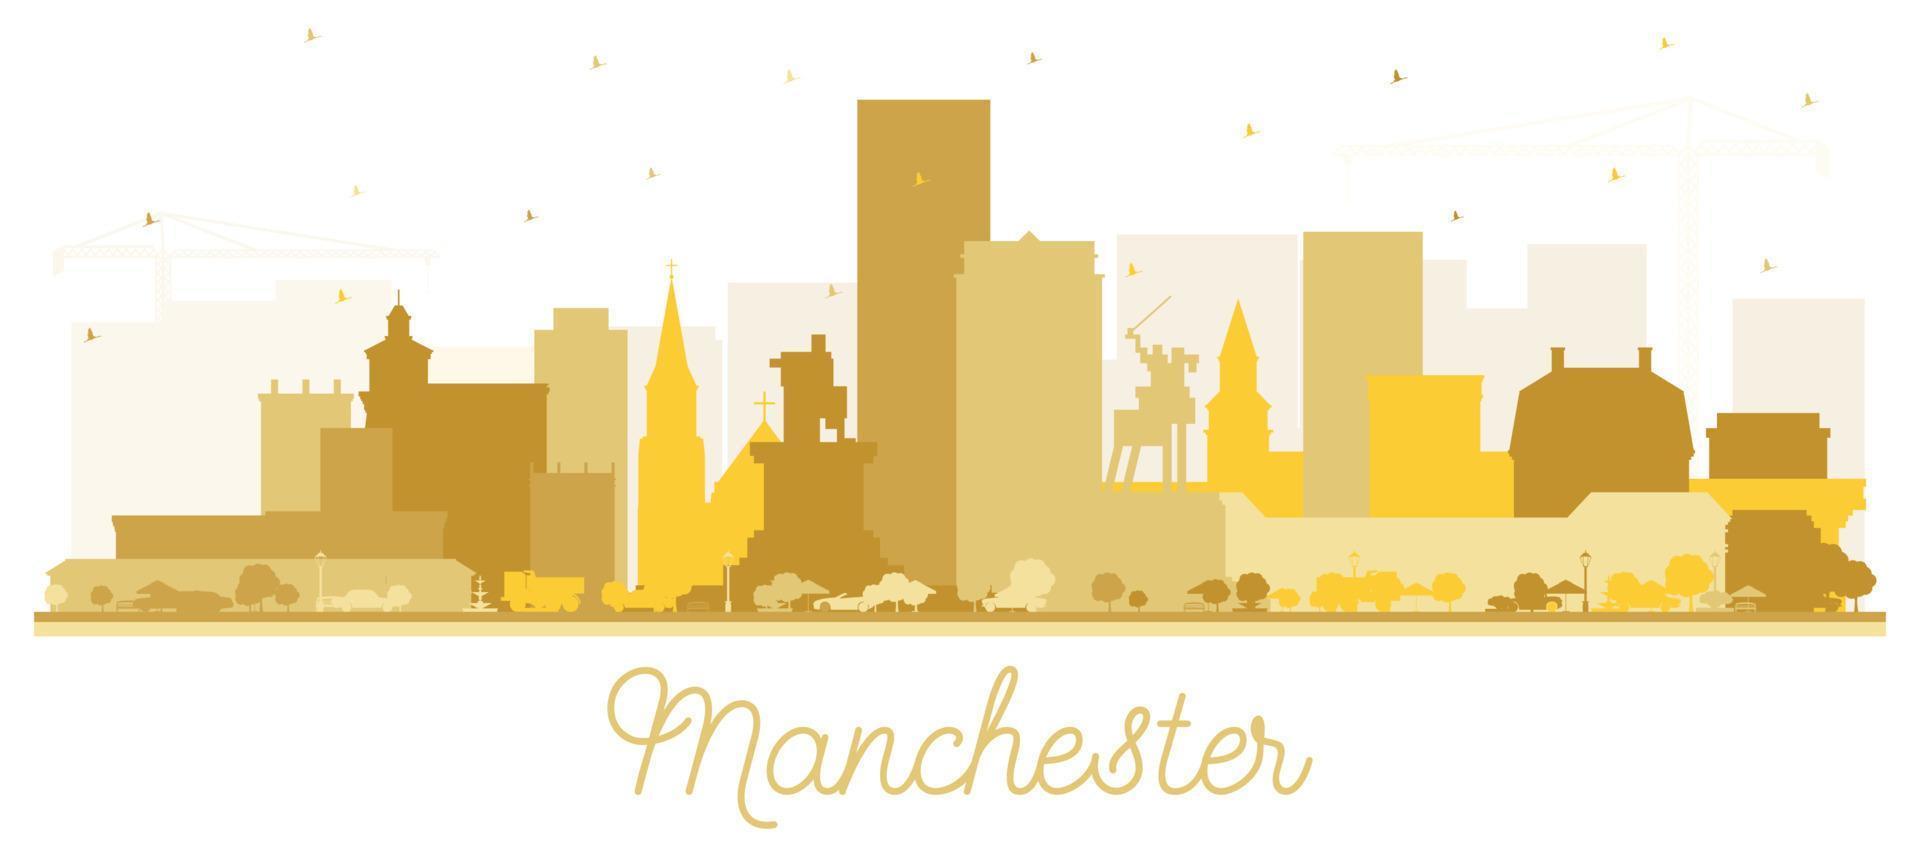 Manchester New Hampshire City Skyline Silhouette with Golden Buildings Isolated on White. vector